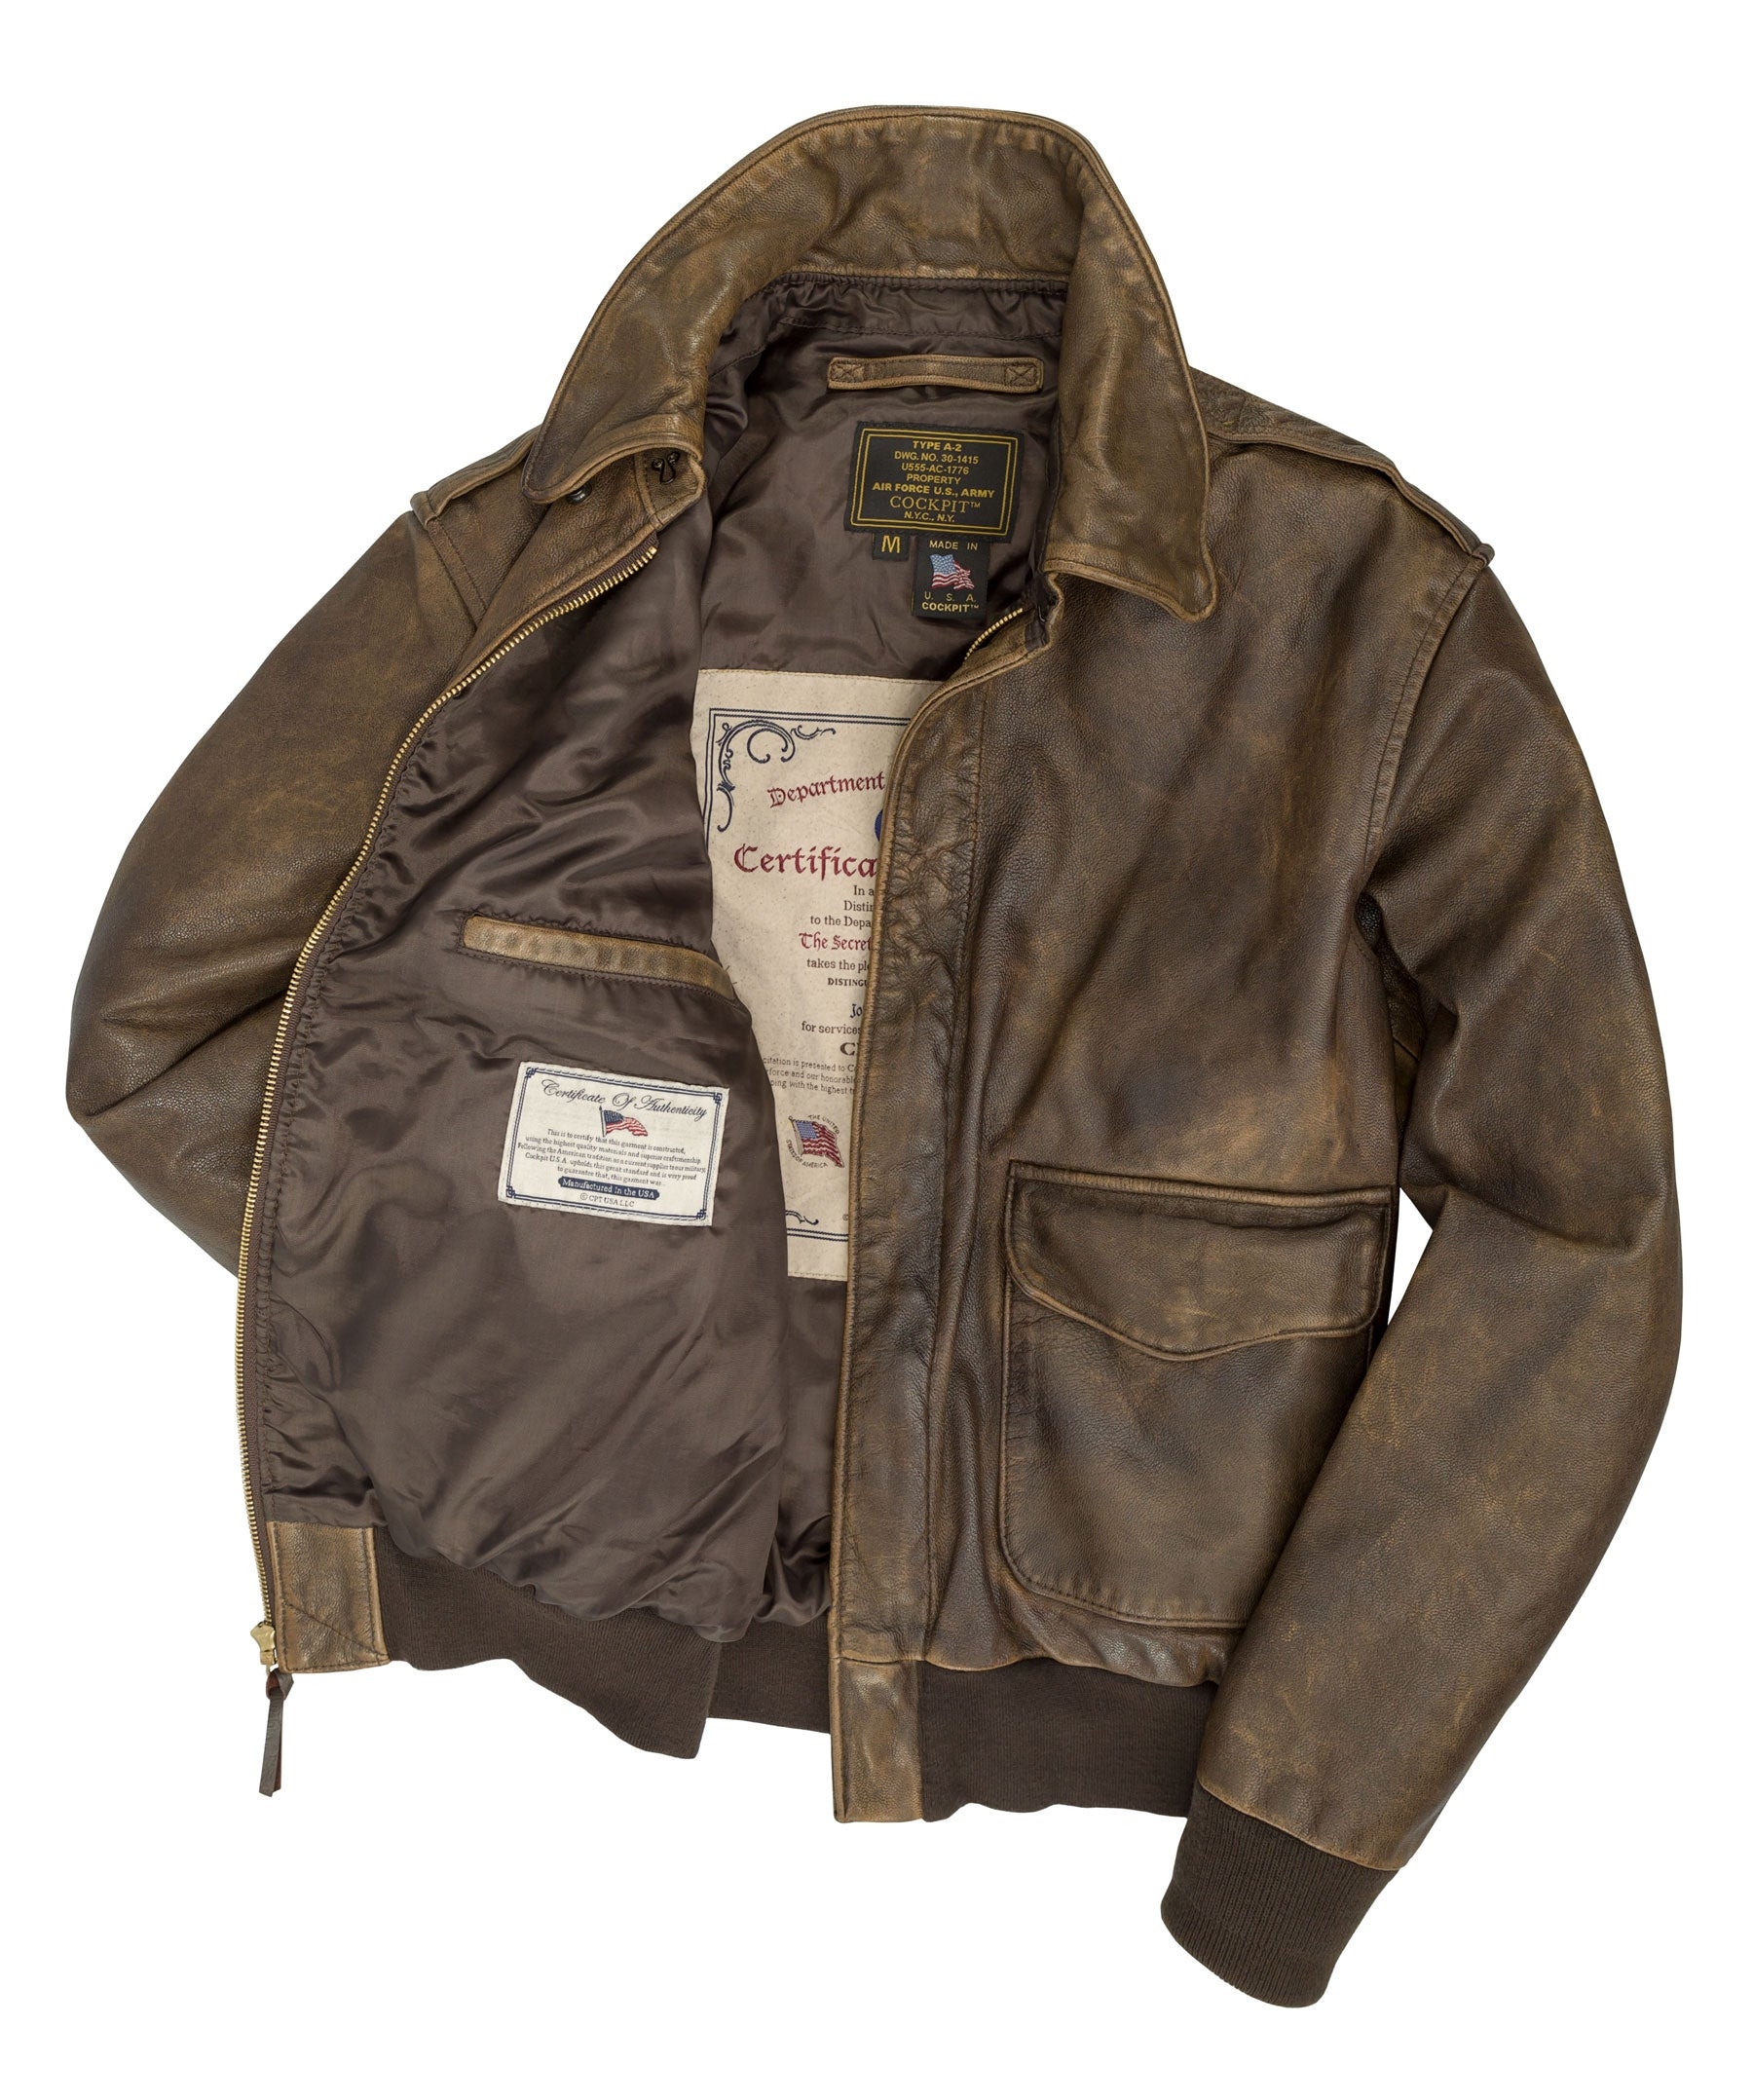 Mustang A-2 Jacket Z21P008